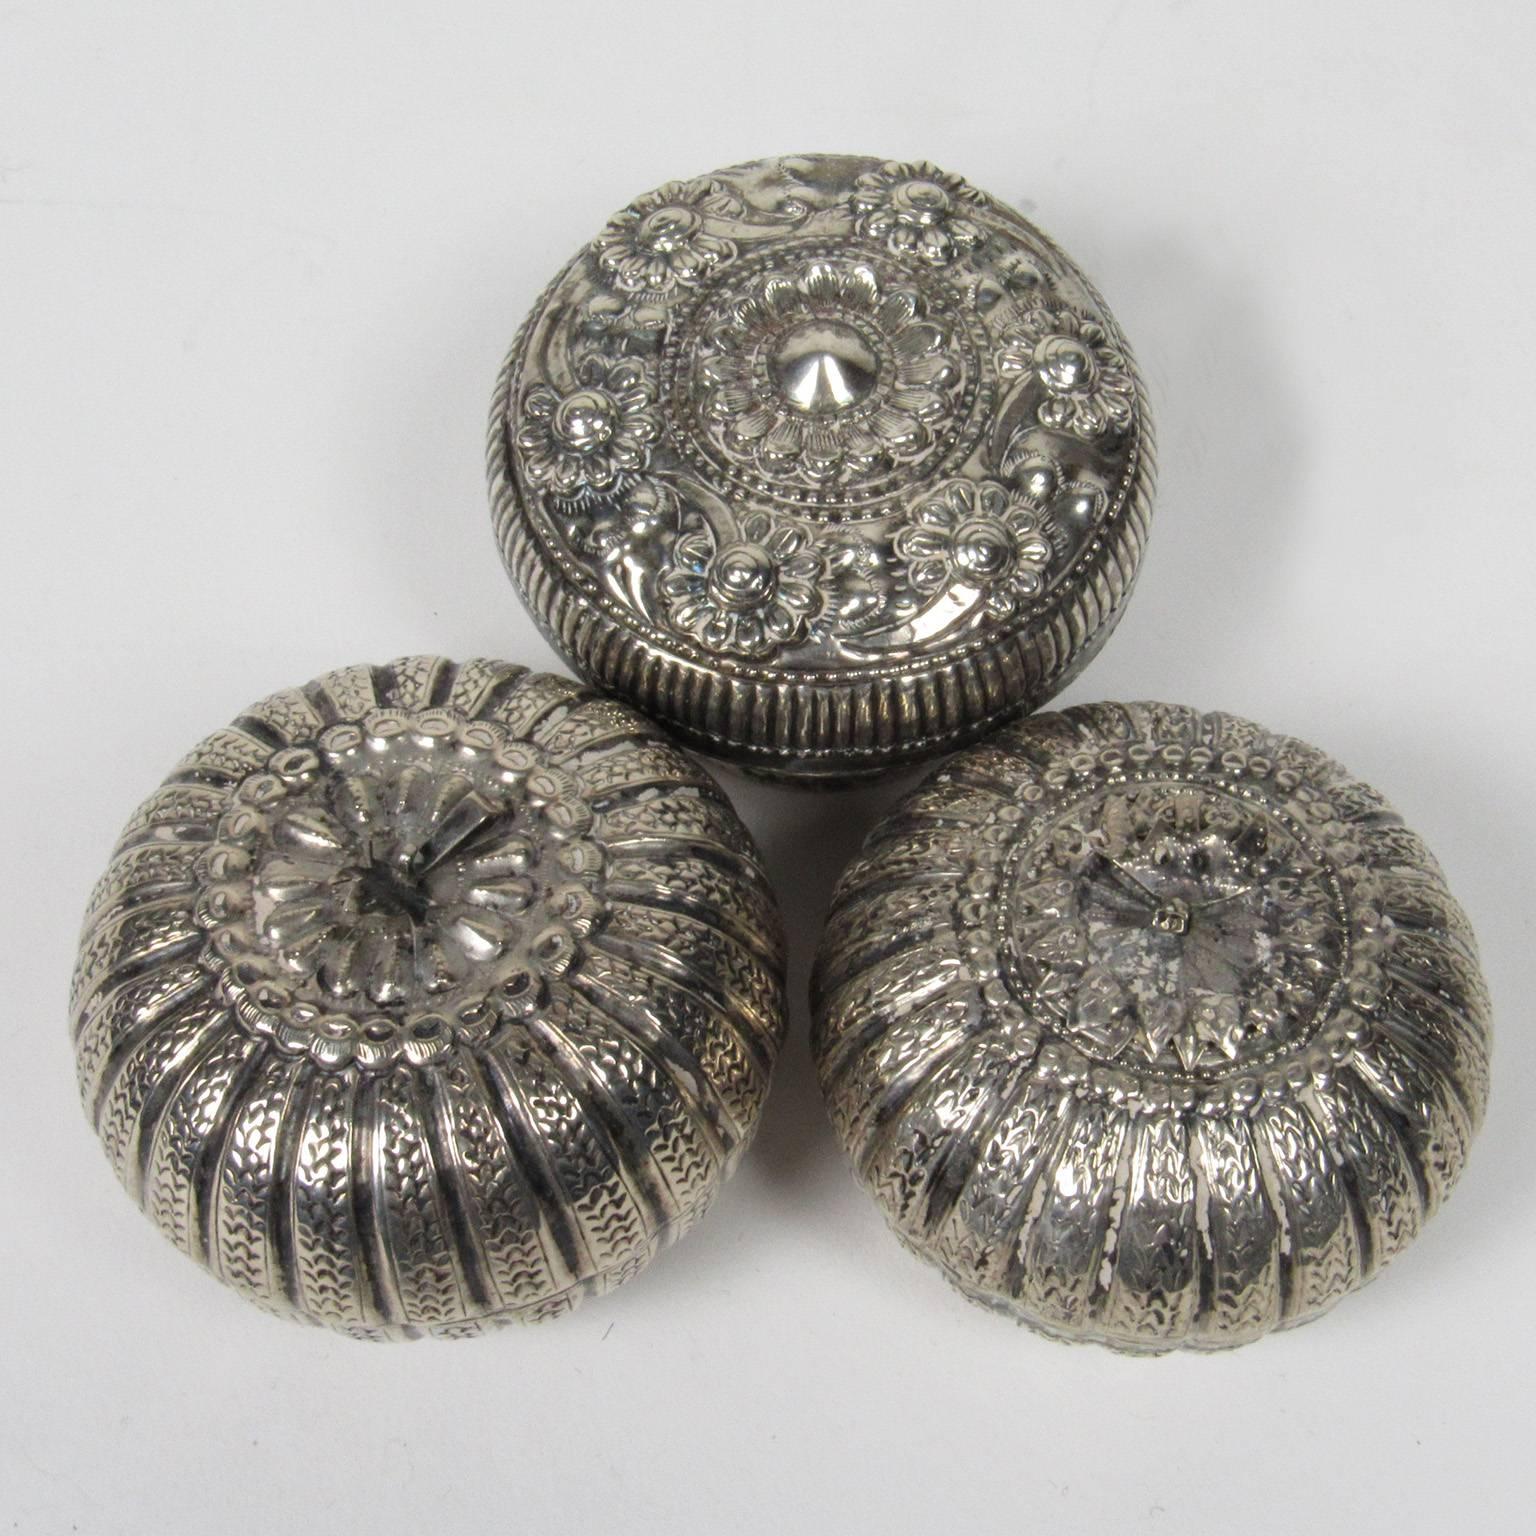 Three Burmese silver betal nut boxes. Two gourd form with gadrooned sides, the other repousse floral decoration. Inscribed on bottom. Measures: Diameter: 2 1/2 in., height: 2 in. (each).